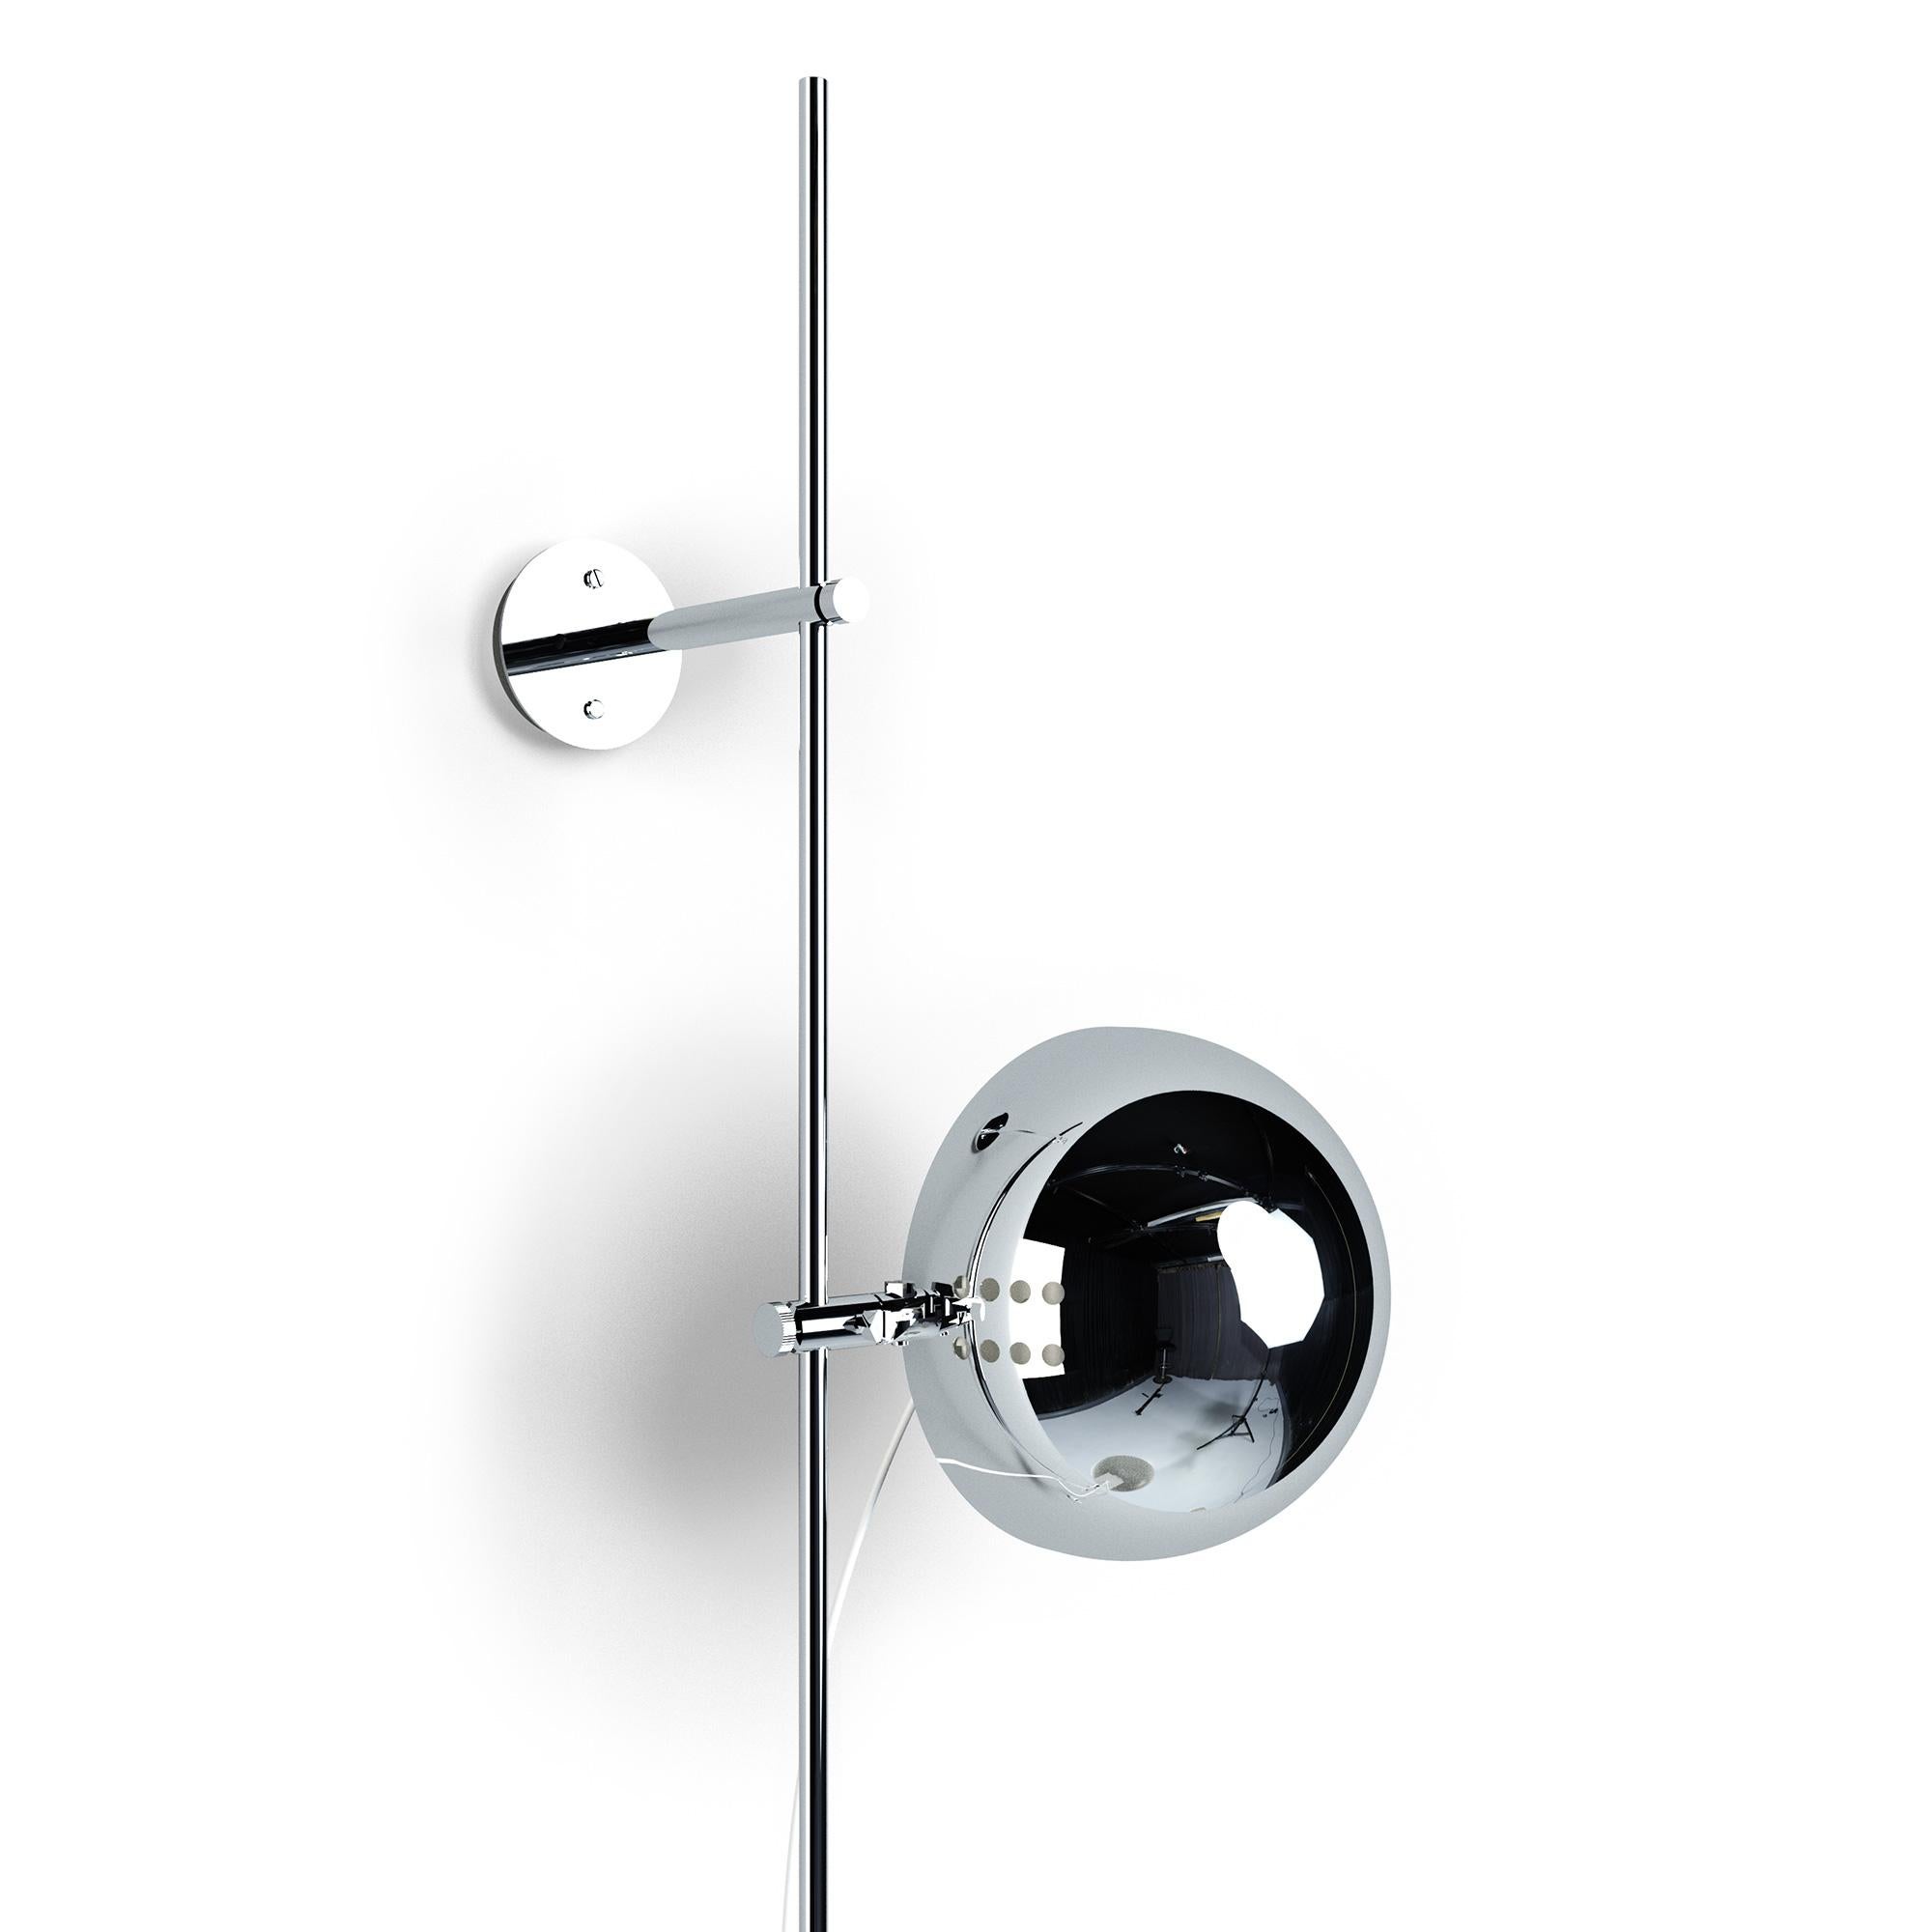 Chrome A24-1500 Wall Lamp by Disderot
Limited Edition. 
Designed by Alain Richard
Dimensions: Ø 30 x H 150 cm.
Materials: Lacquered metal and chrome.

Delivered with authentication certificate. Made in France. Available in different colored metal